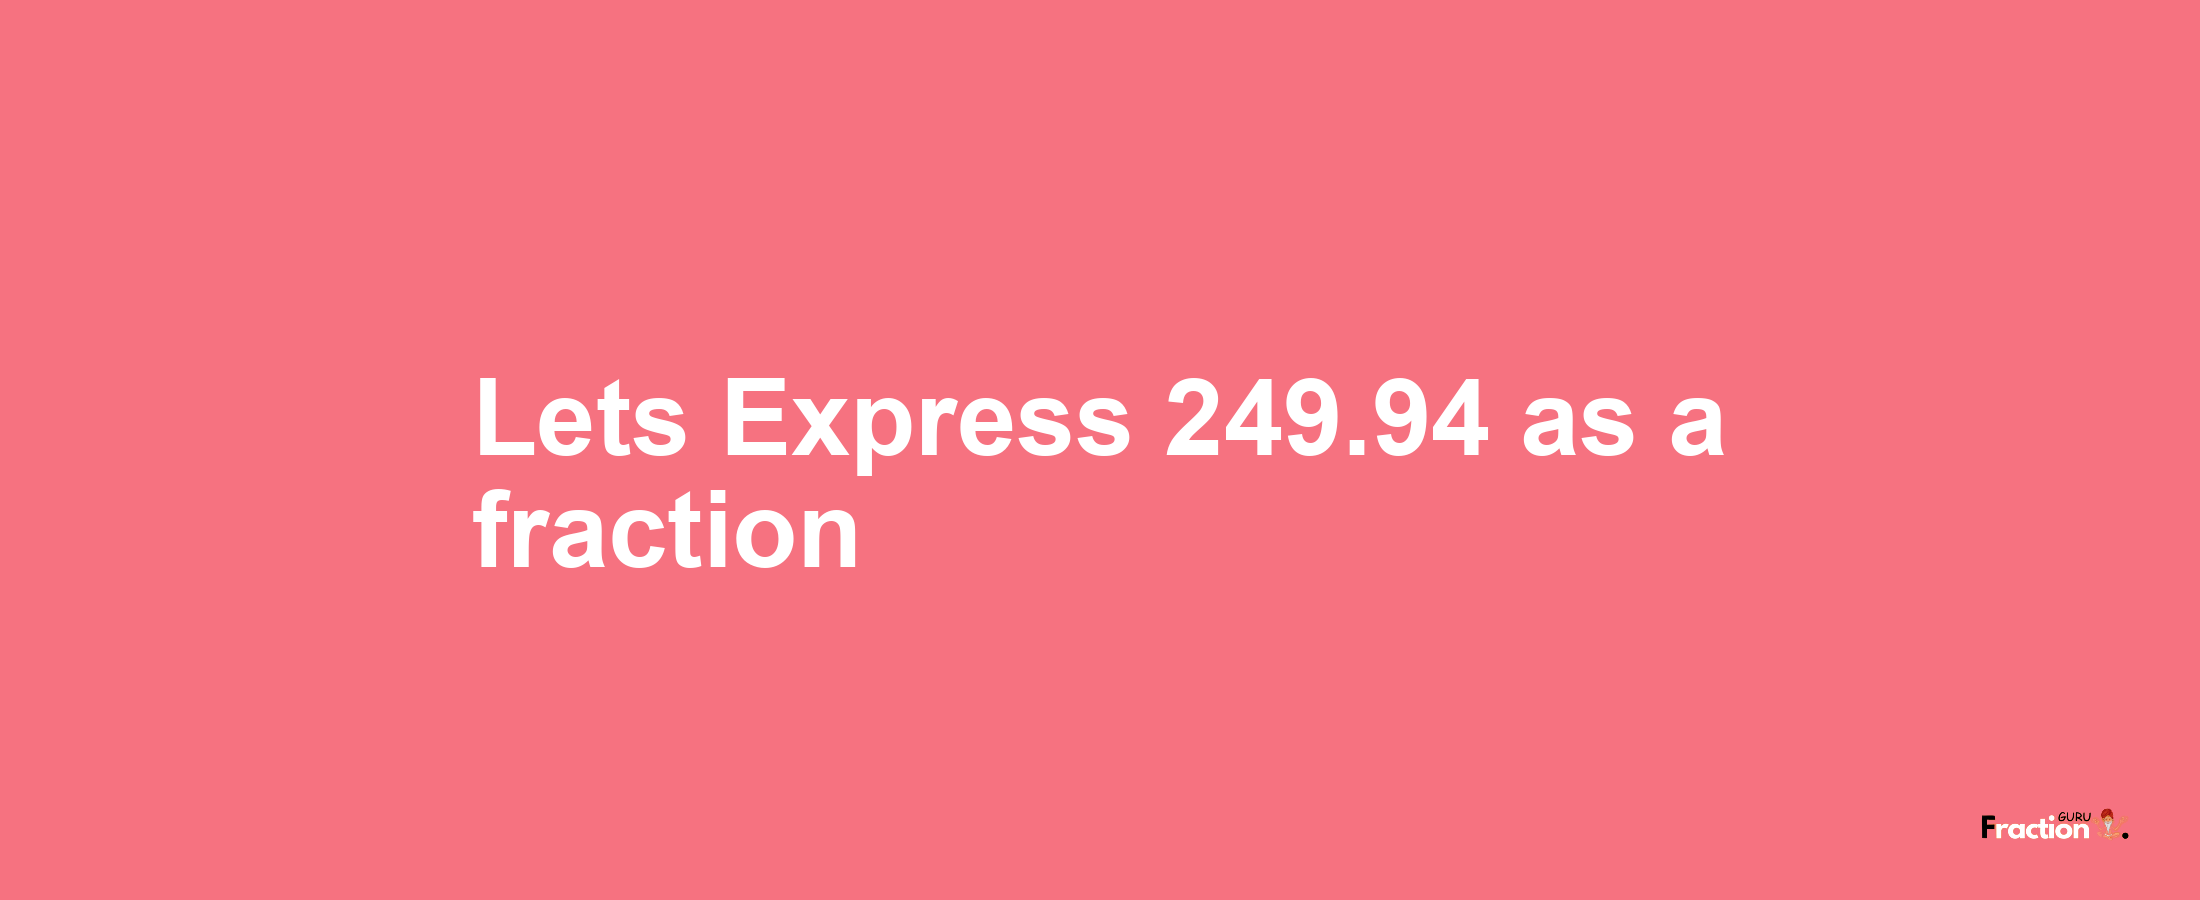 Lets Express 249.94 as afraction